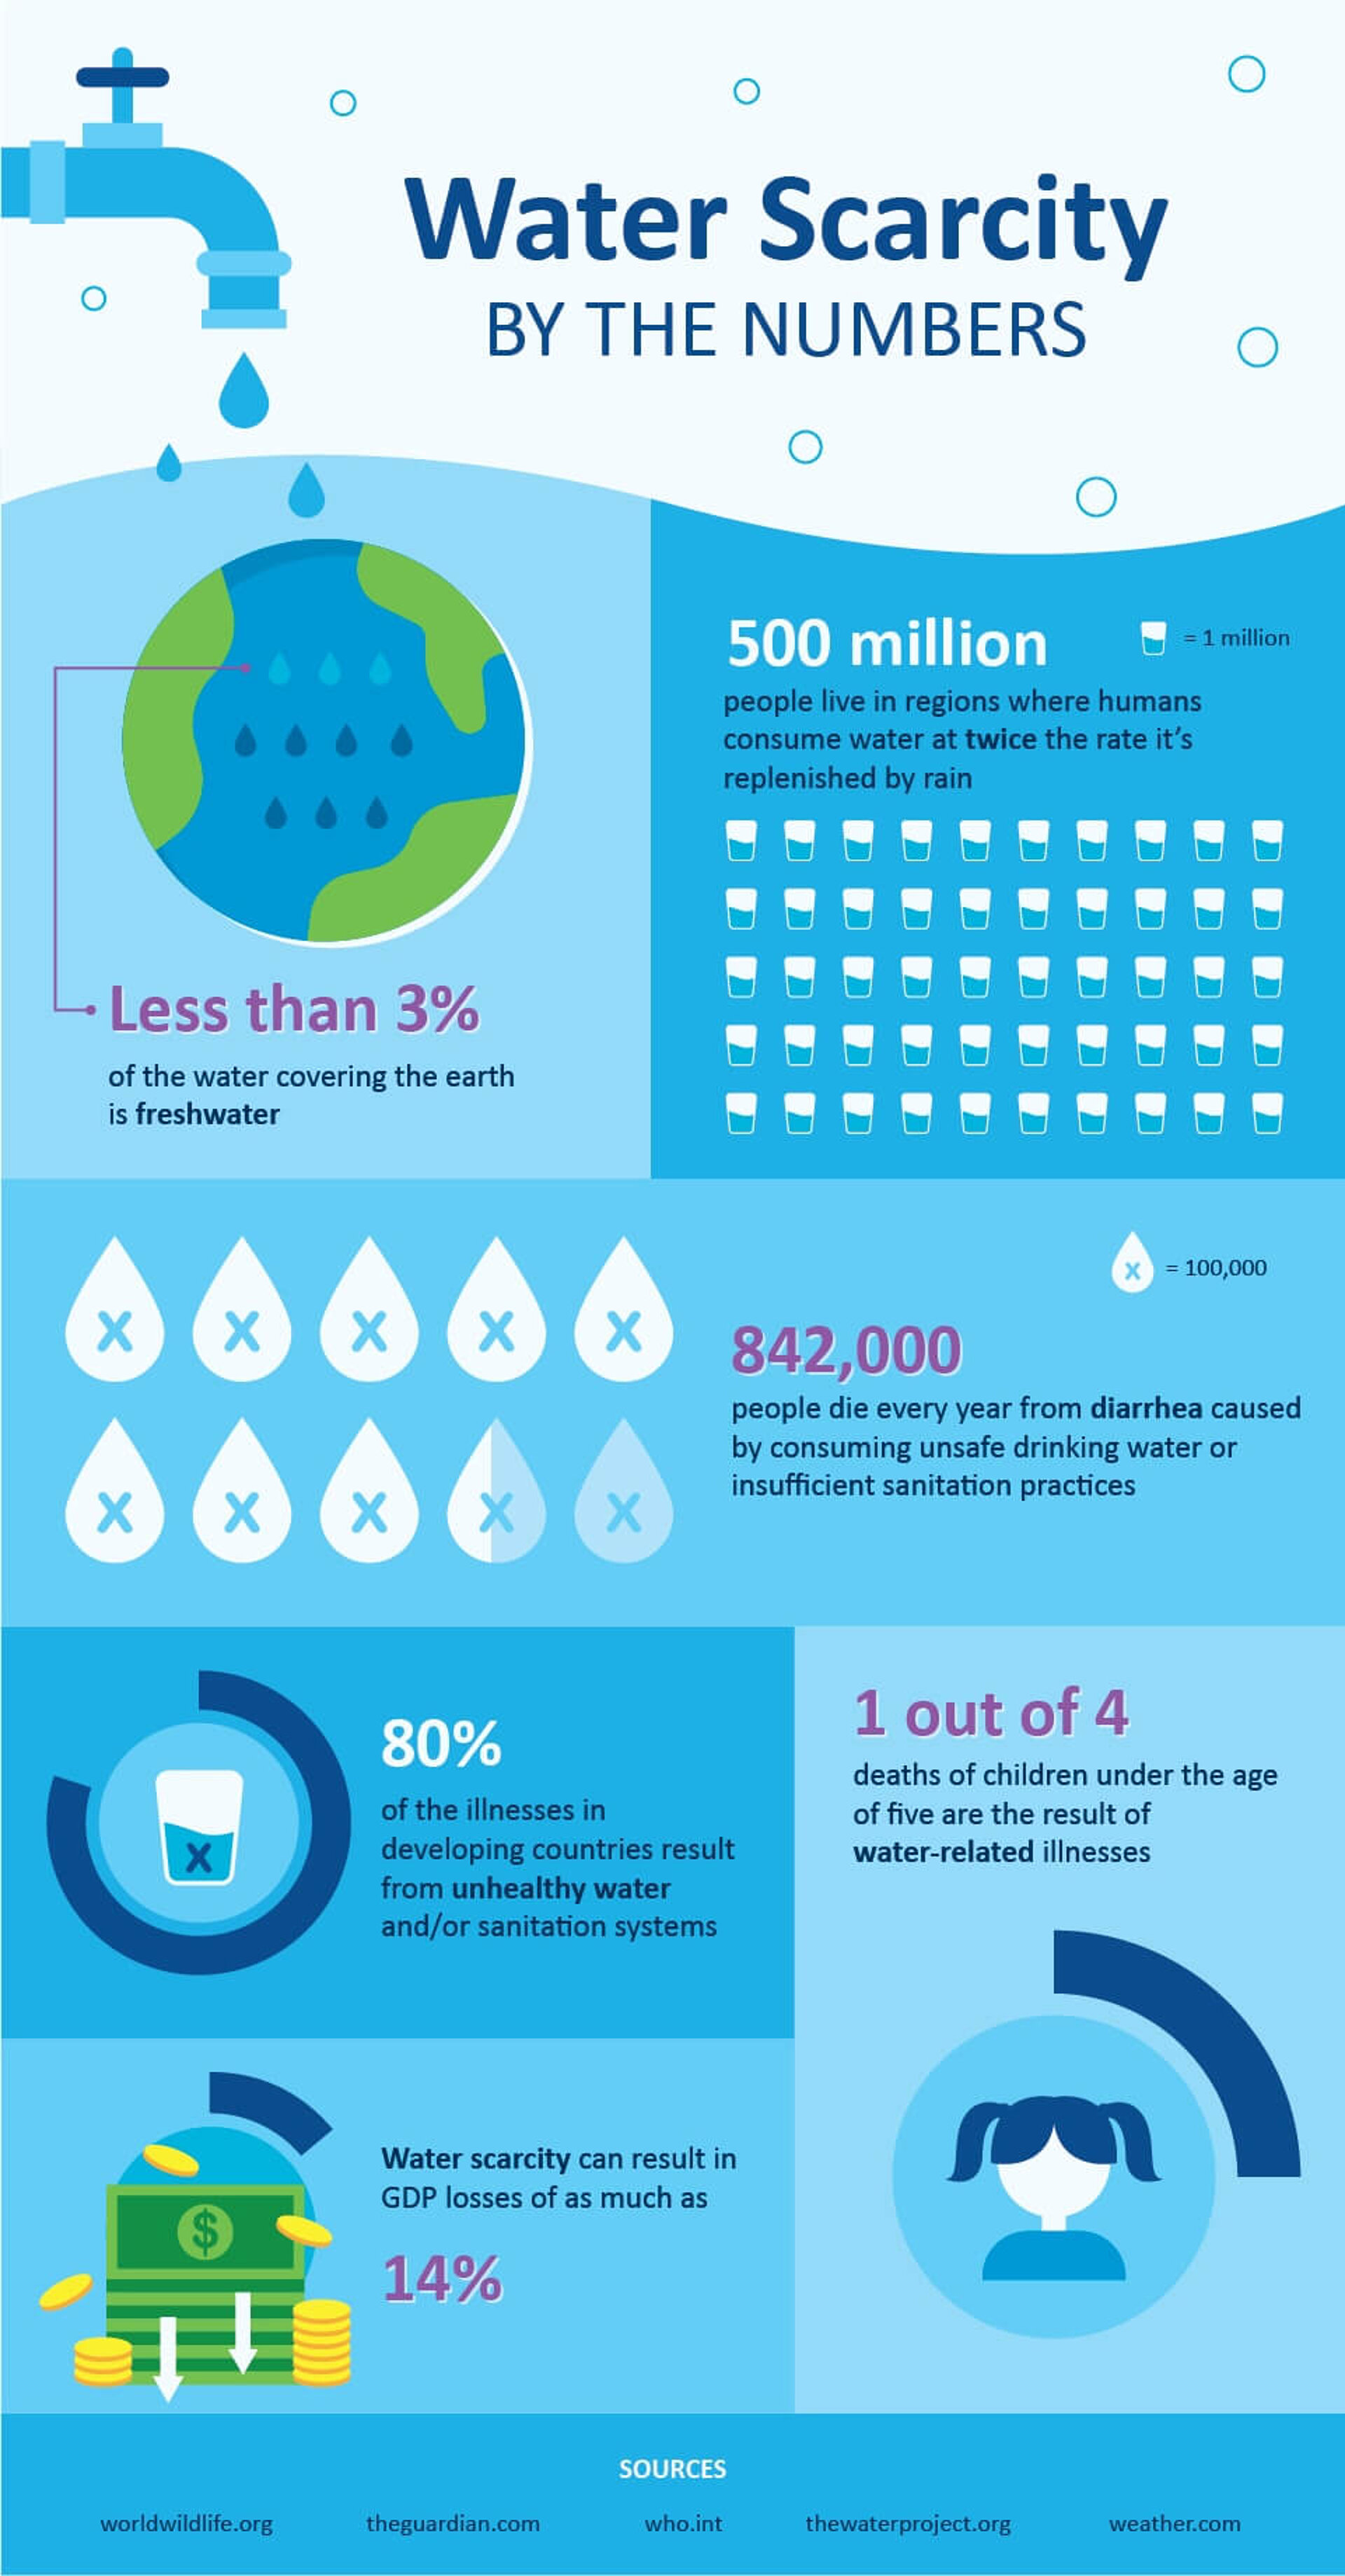 Water scarcity by the numbers